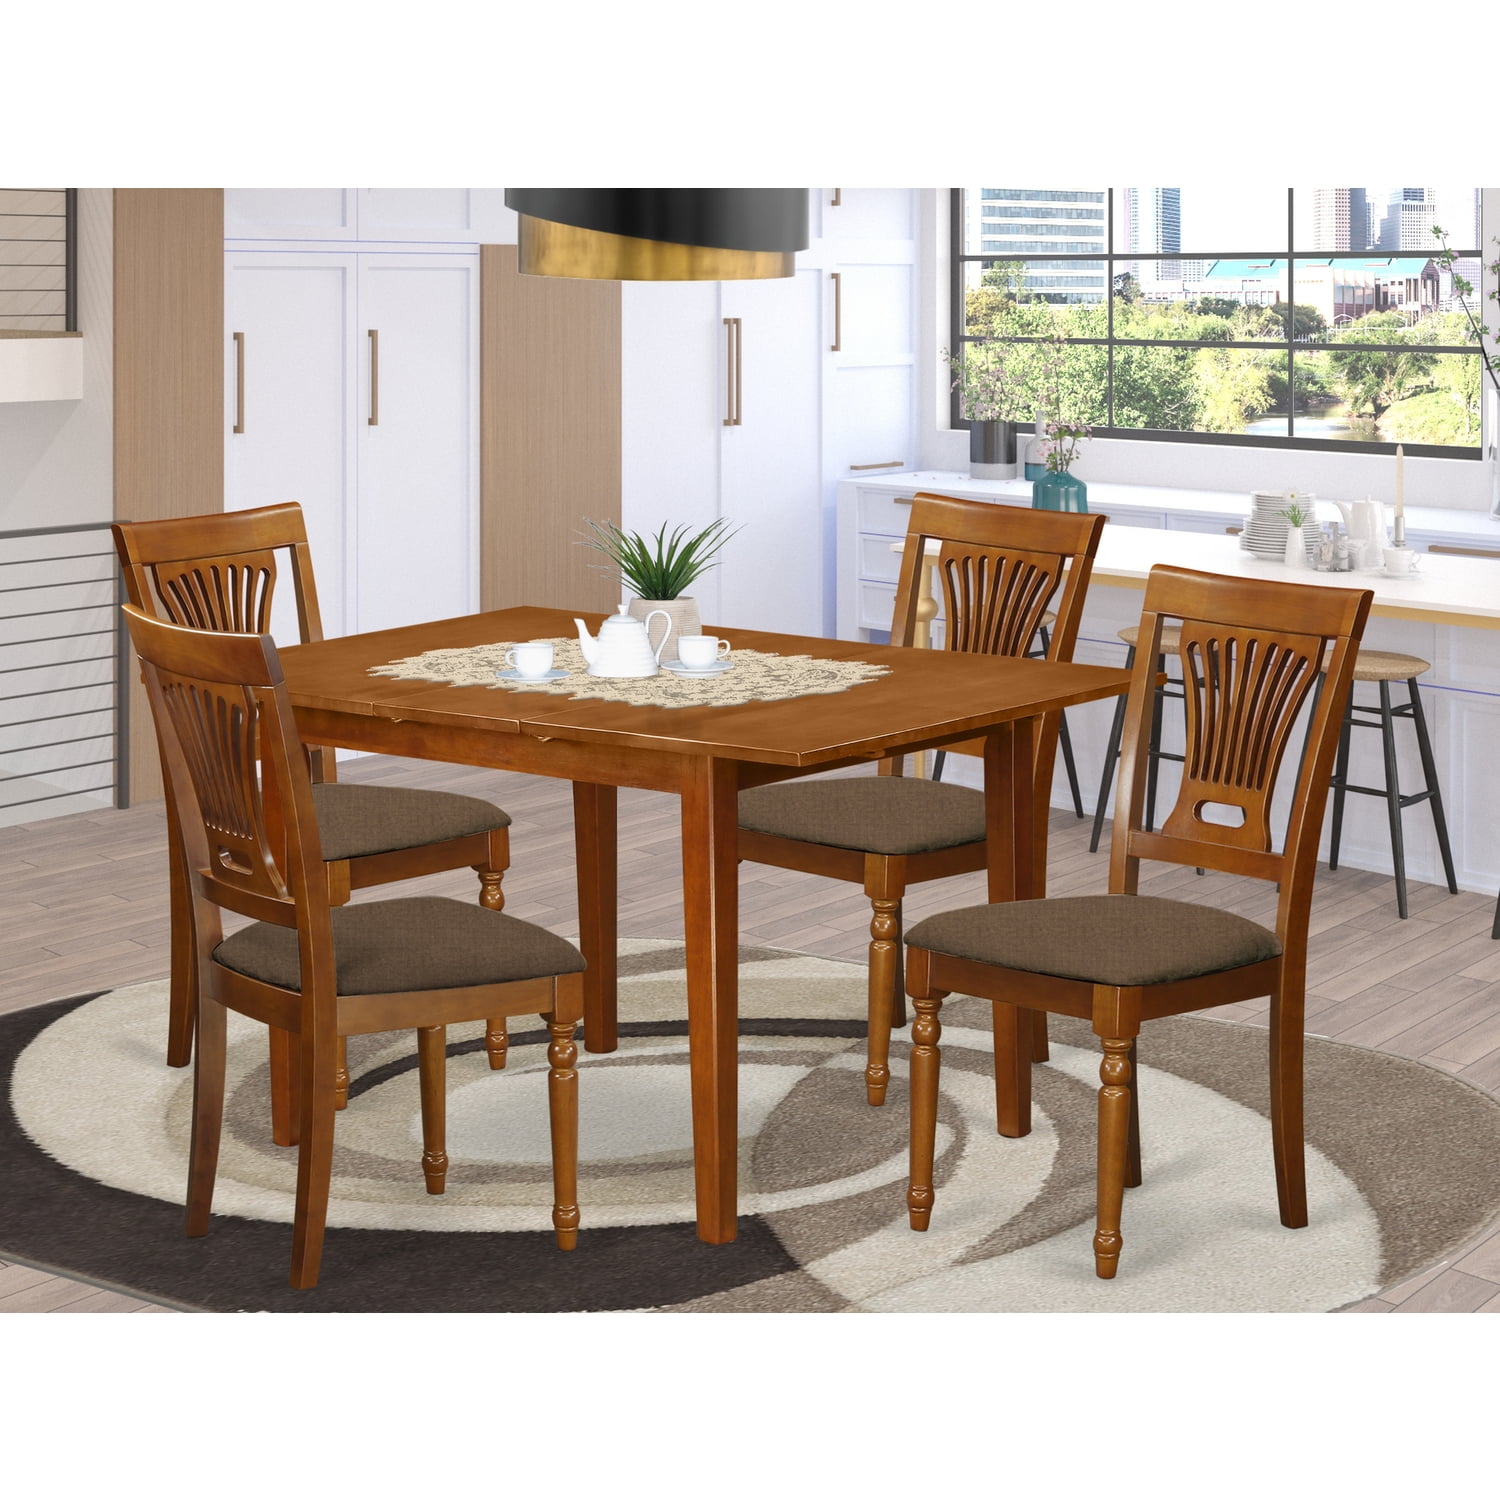 Kitchen Table Set Small Dining Tables, Small Rectangle Dining Table And Chairs